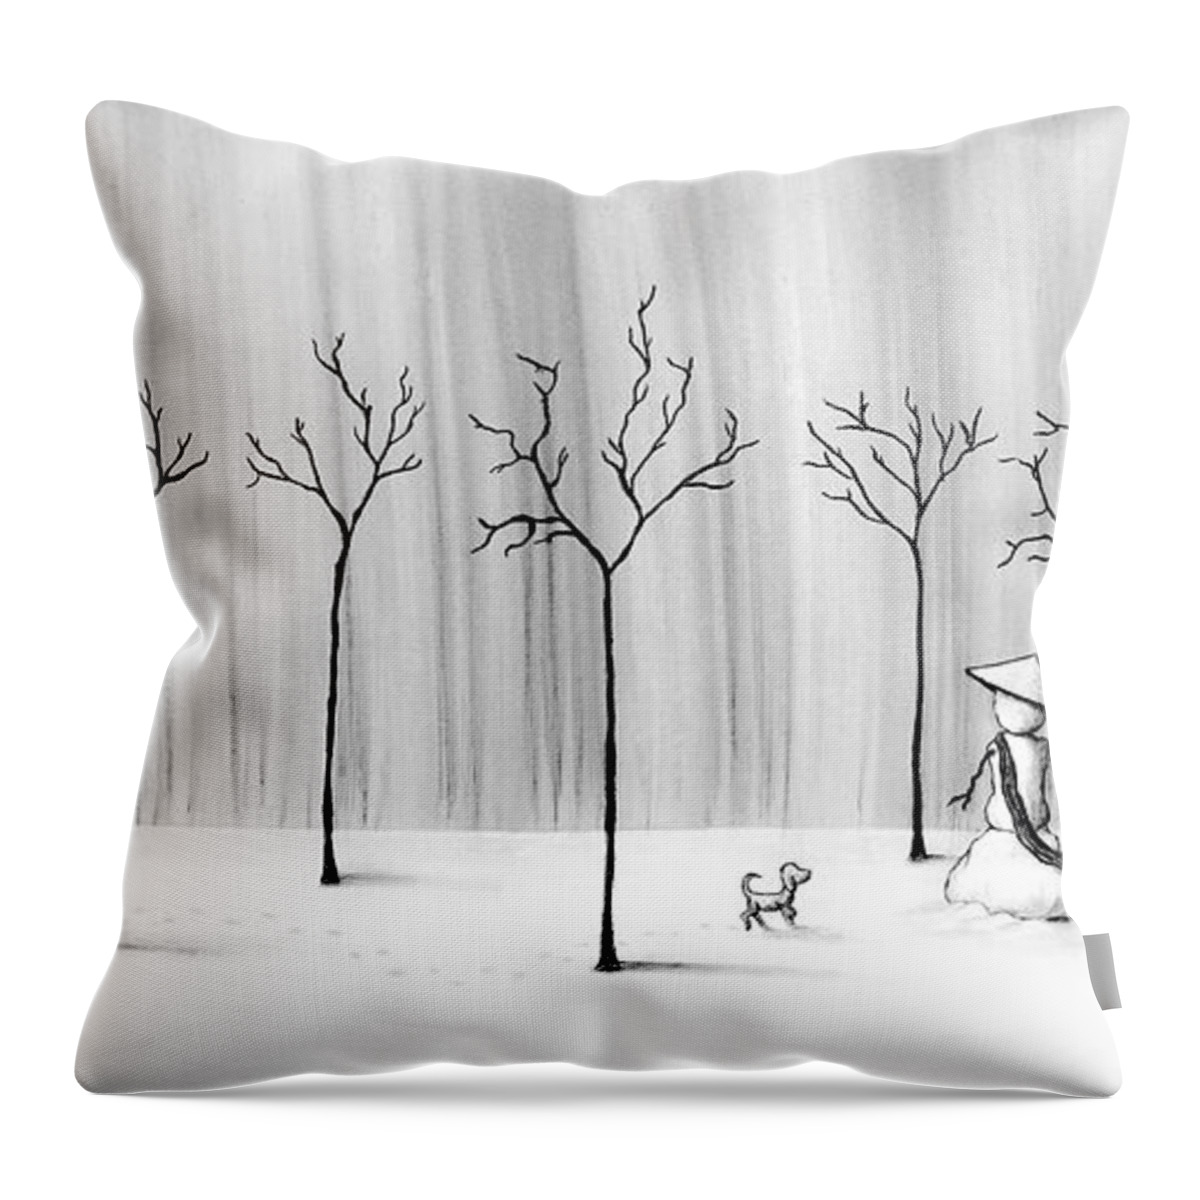 Snow Throw Pillow featuring the drawing Micah Monk 10 - Snowmonk by Lori Grimmett